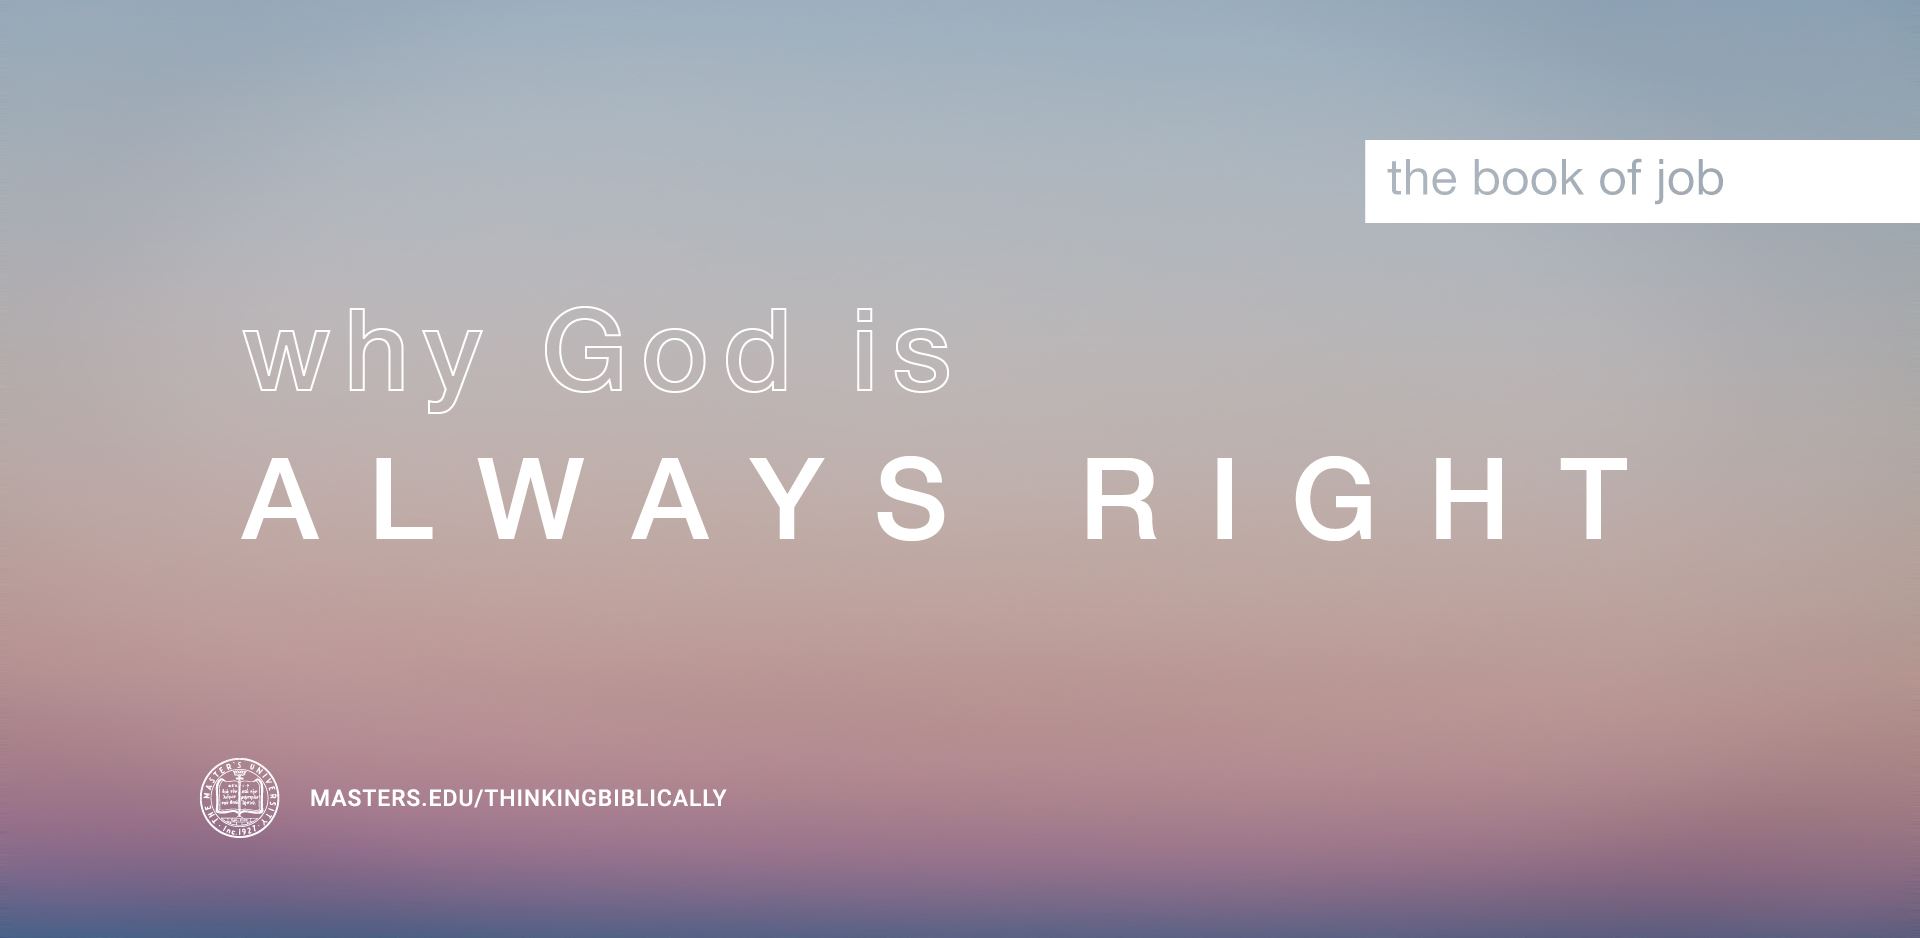 Why God is always right Featured Image